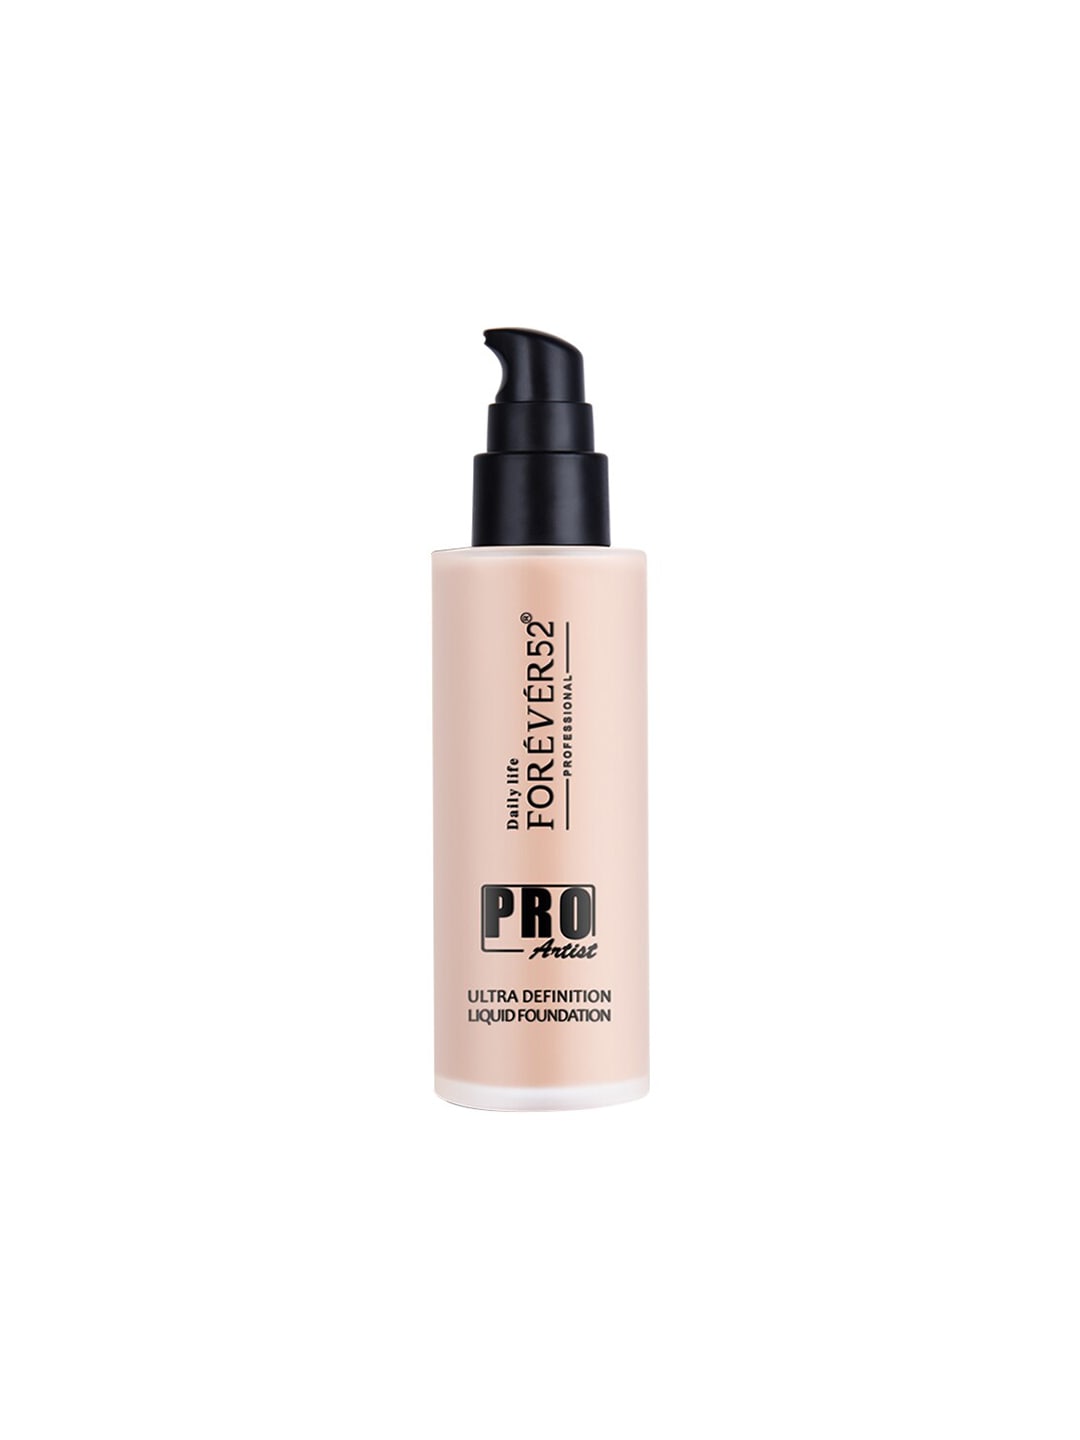 Daily Life Forever52 Women Pro Artist Ultra Definition Liquid Foundation Price in India